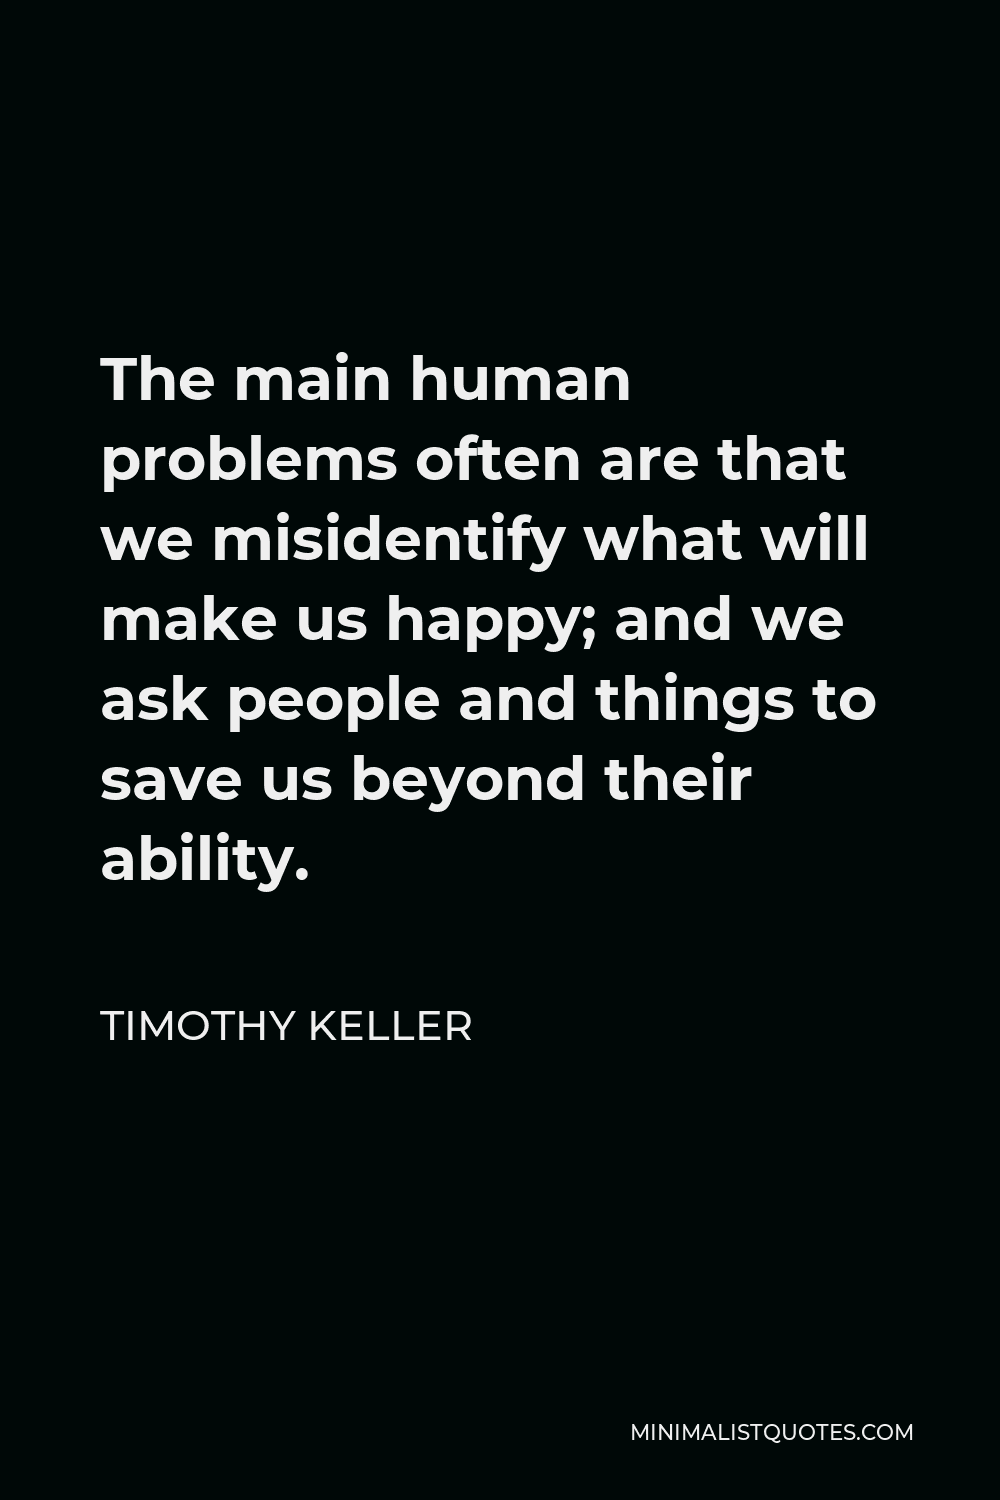 Timothy Keller Quote - The main human problems often are that we misidentify what will make us happy; and we ask people and things to save us beyond their ability.